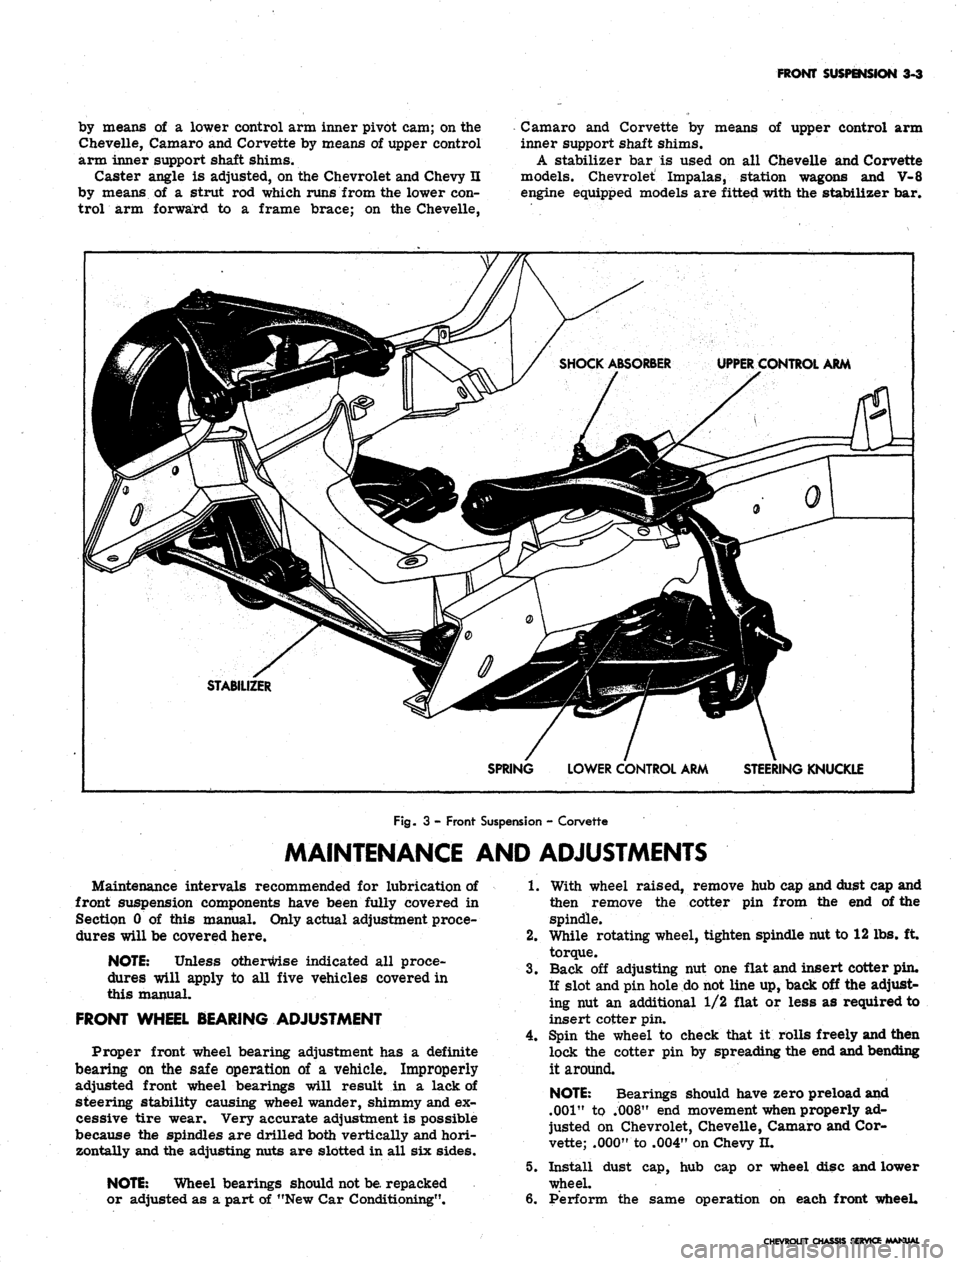 CHEVROLET CAMARO 1967 1.G Chassis Workshop Manual 
FRONT SUSPENSION 3-3

by means of a lower control arm inner pivot cam; on the

Chevelle, Camaro and Corvette by means of upper control

arm inner support shaft shims.

Caster angle is adjusted, on th